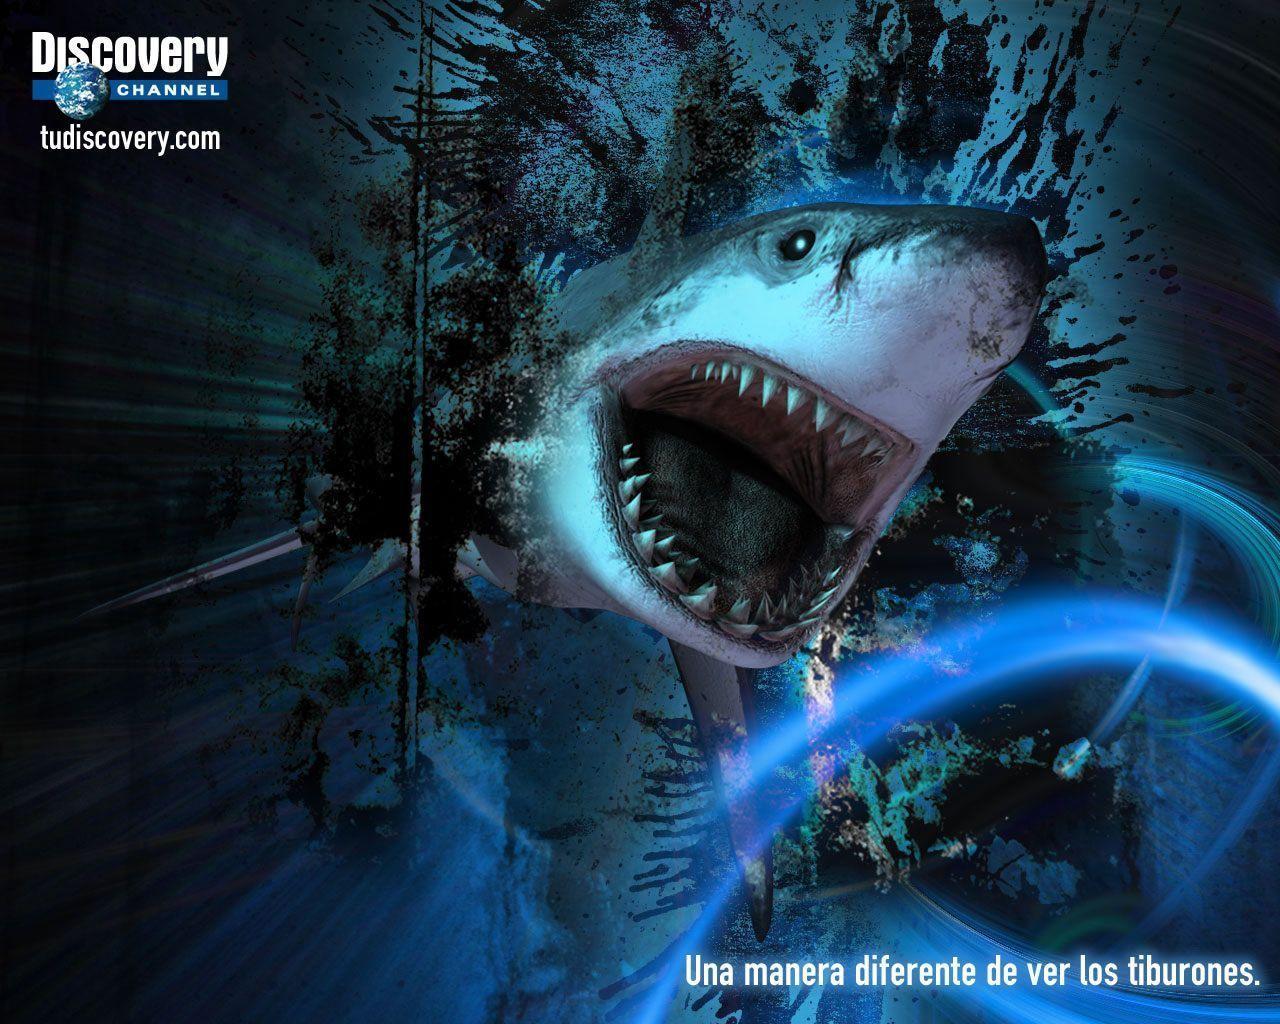 Wallpaper For > Discovery Channel Wallpaper